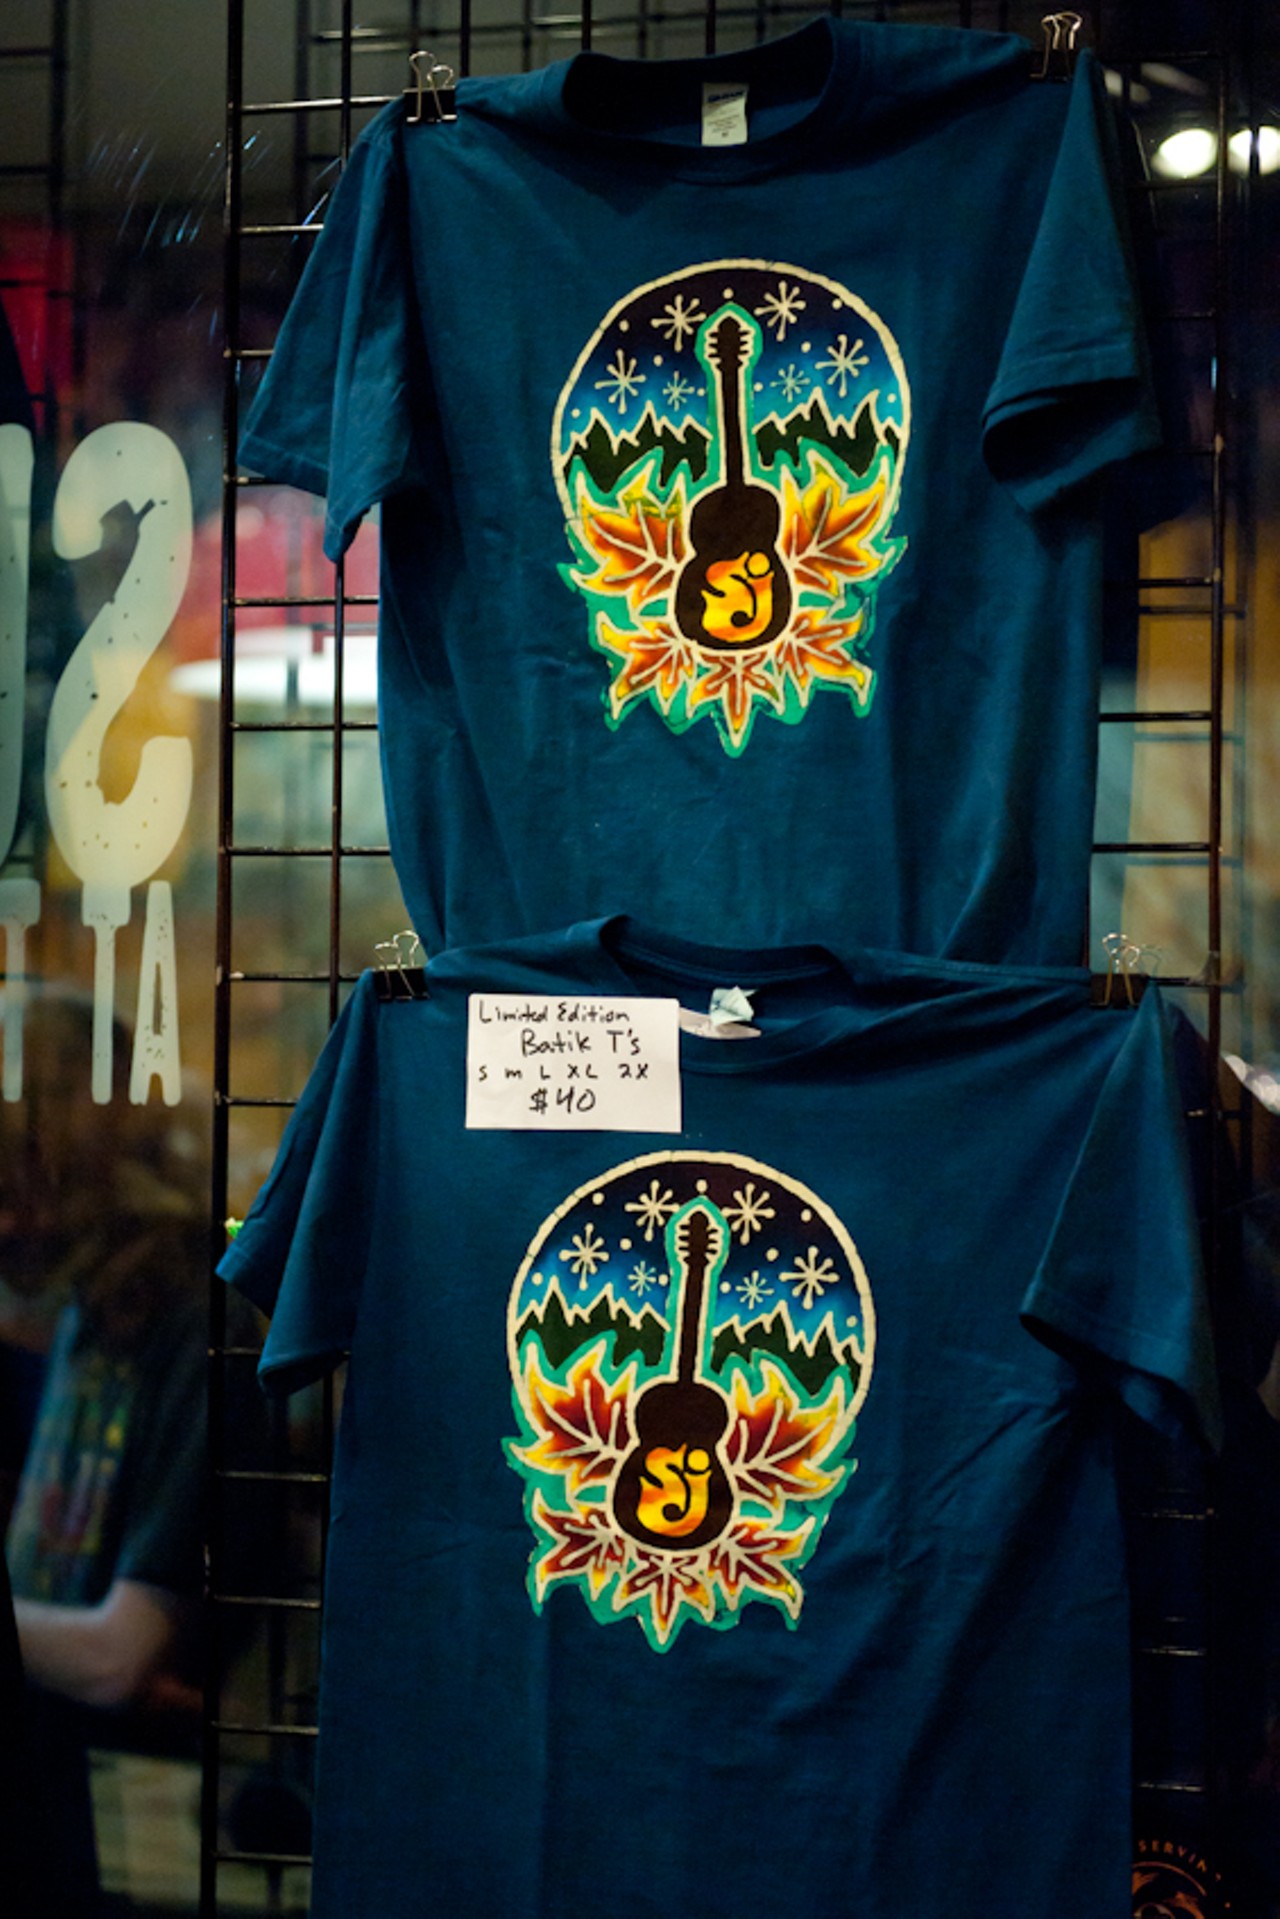 String Cheese Incident merch on sale in Suite 100 before the show.